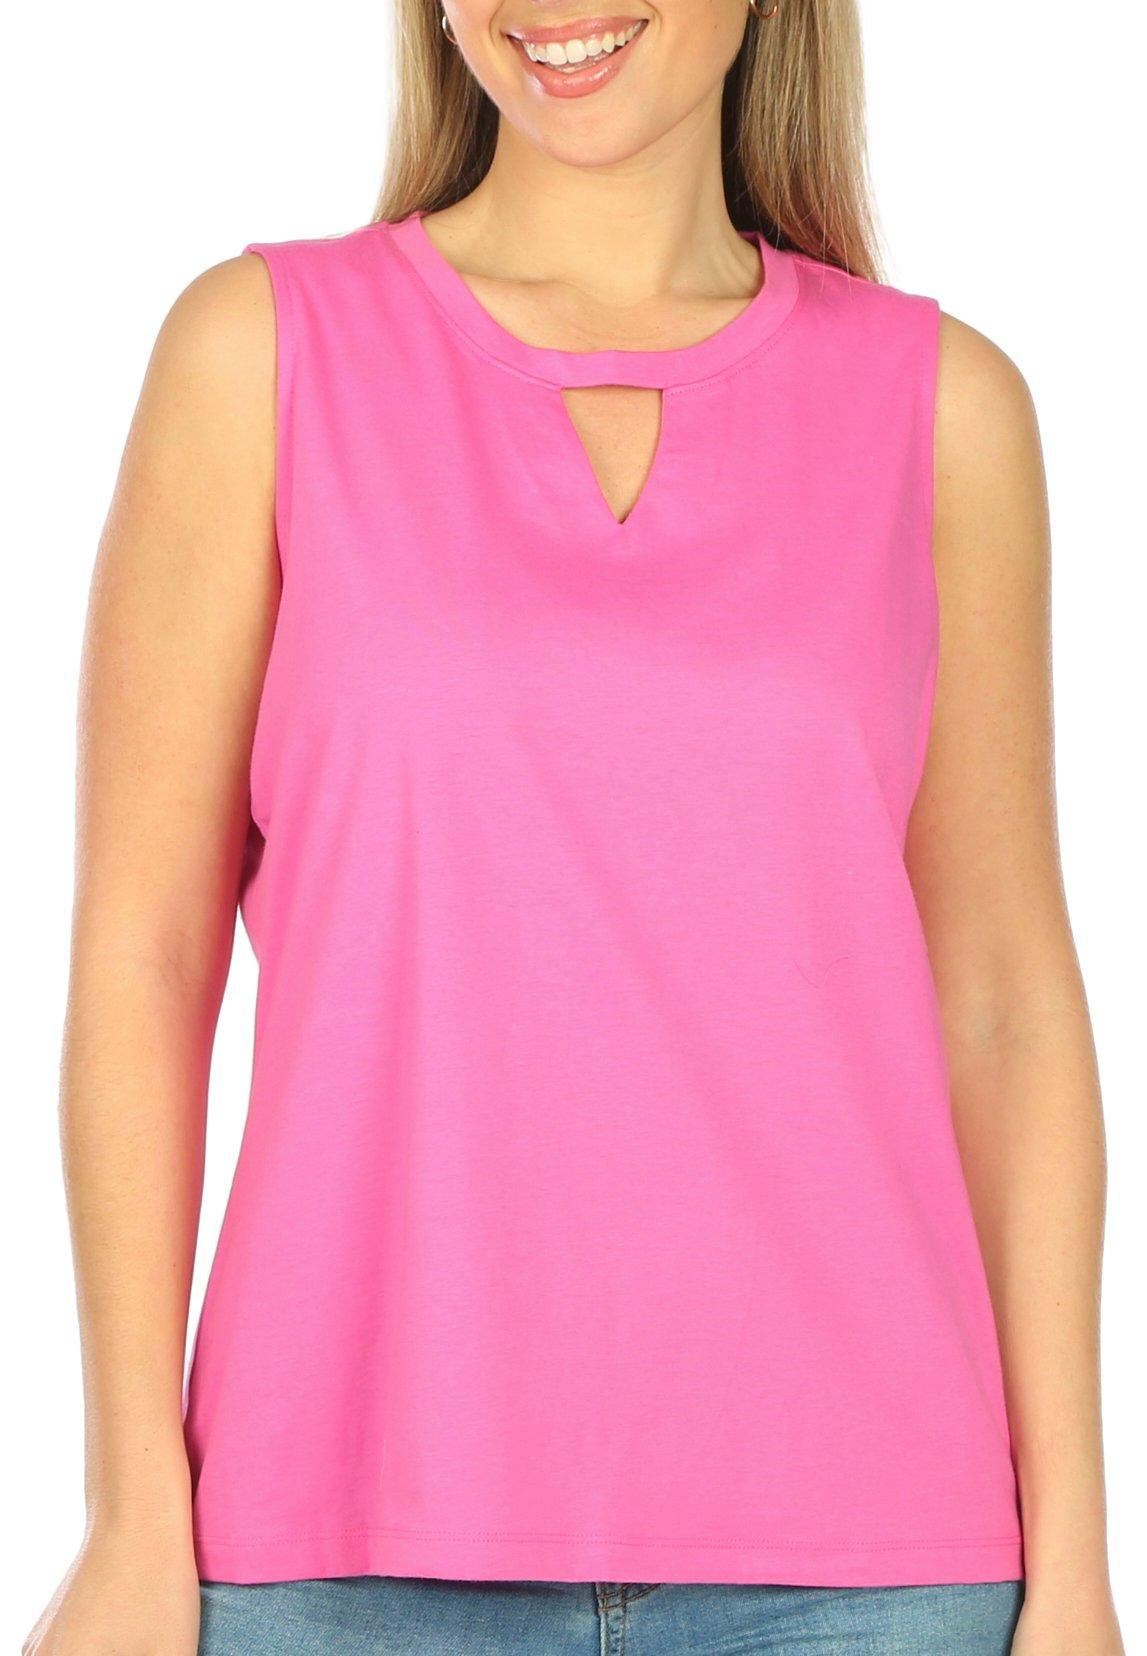 Coral Bay Petite Solid Keyhole Sleeveless Top